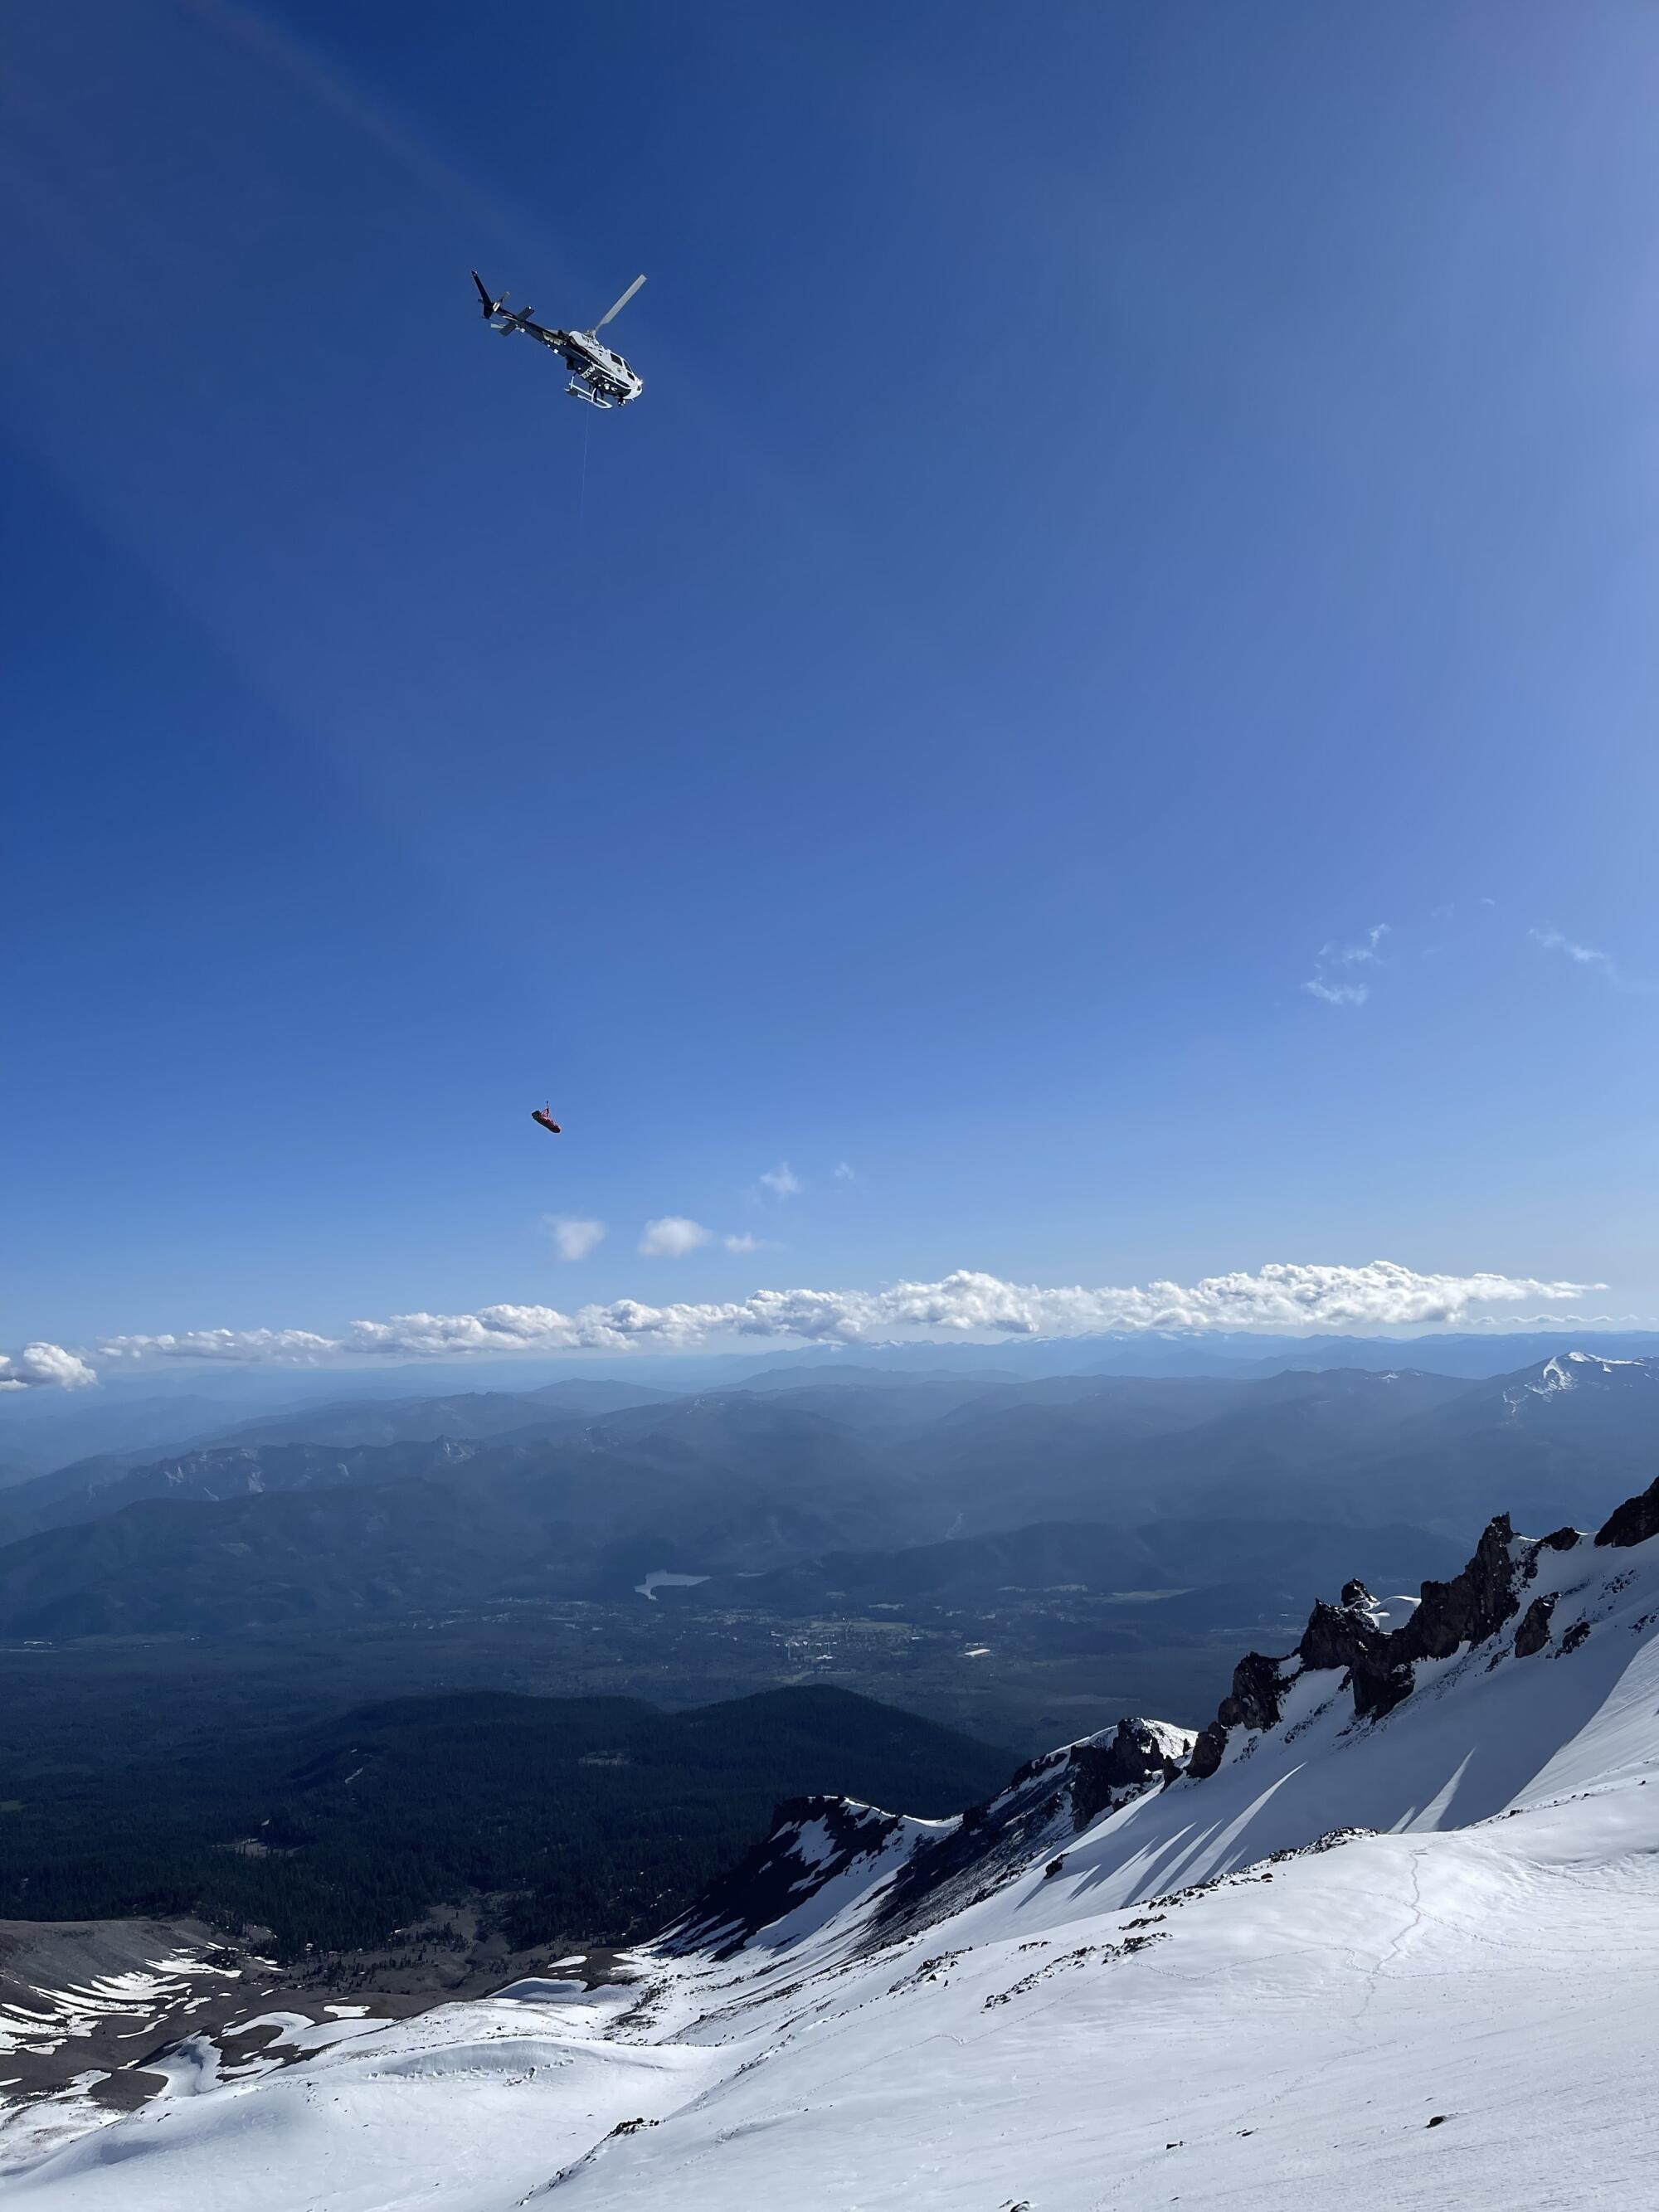 A helicopter hovers over a snowy slope